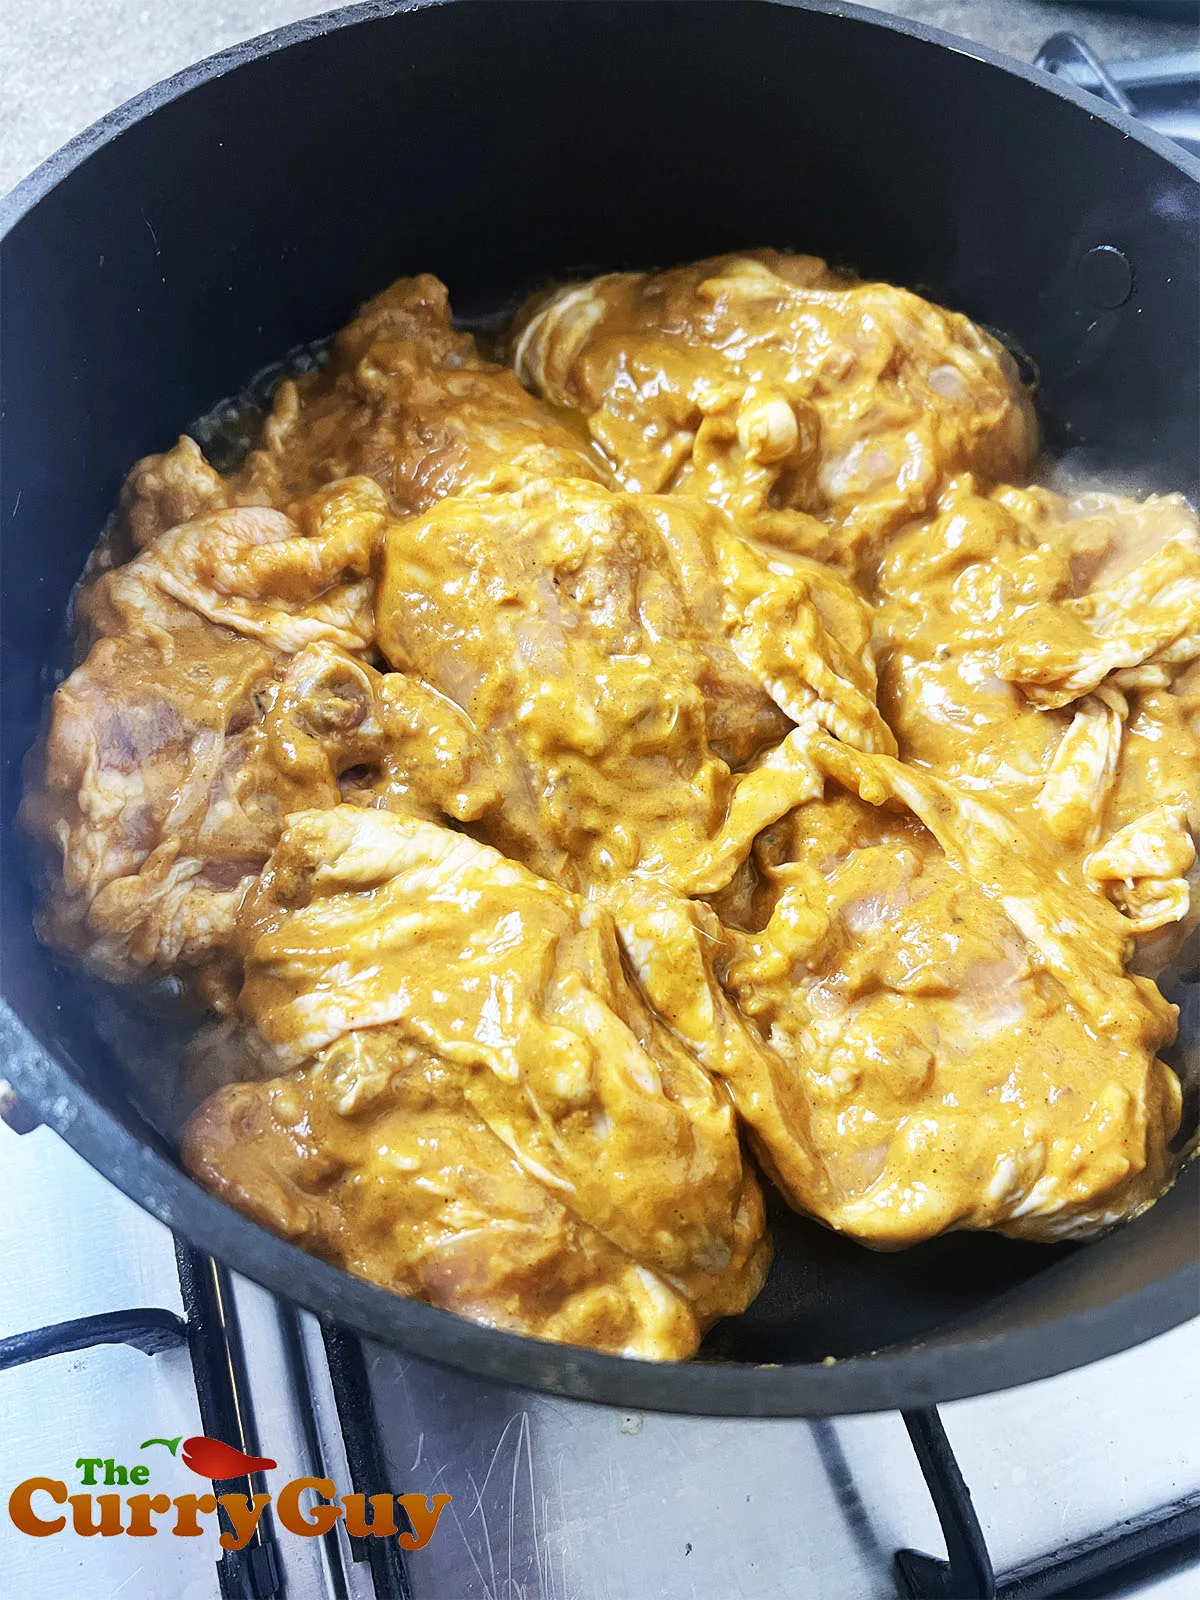 Marinaded chicken in the pot.